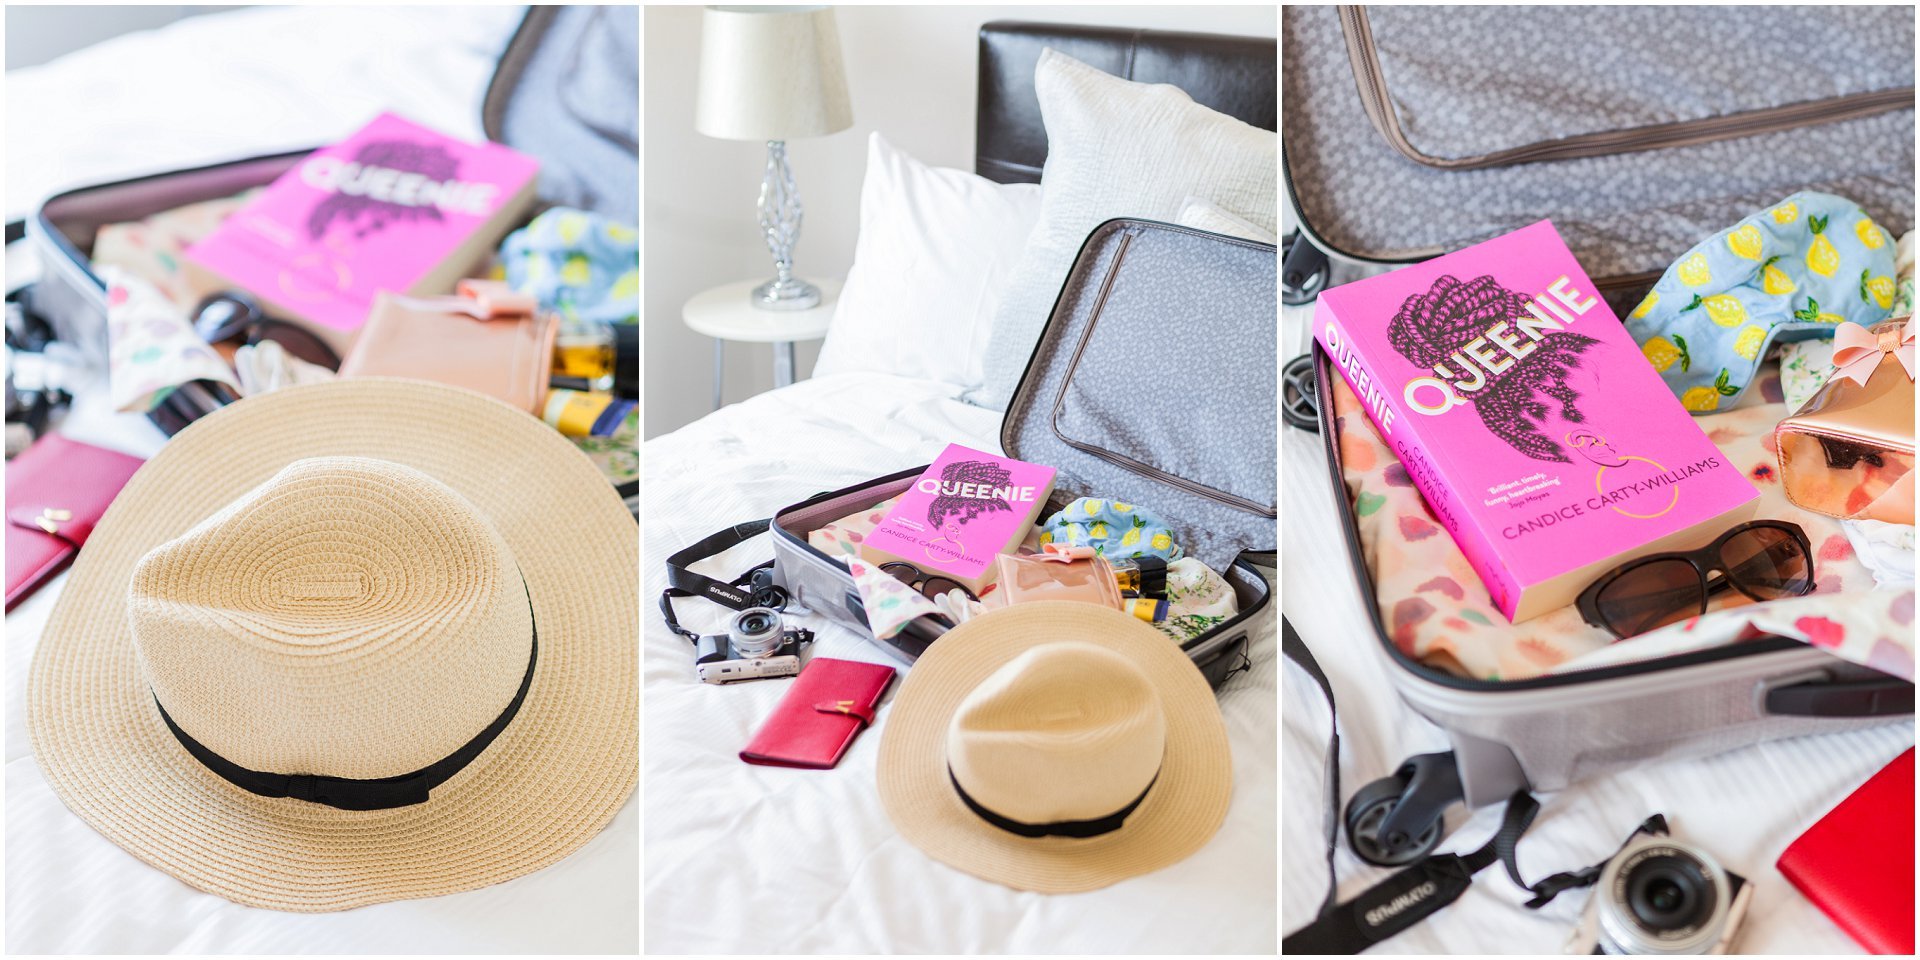 honeymoon travel accessories - London brand photography - styled product photography